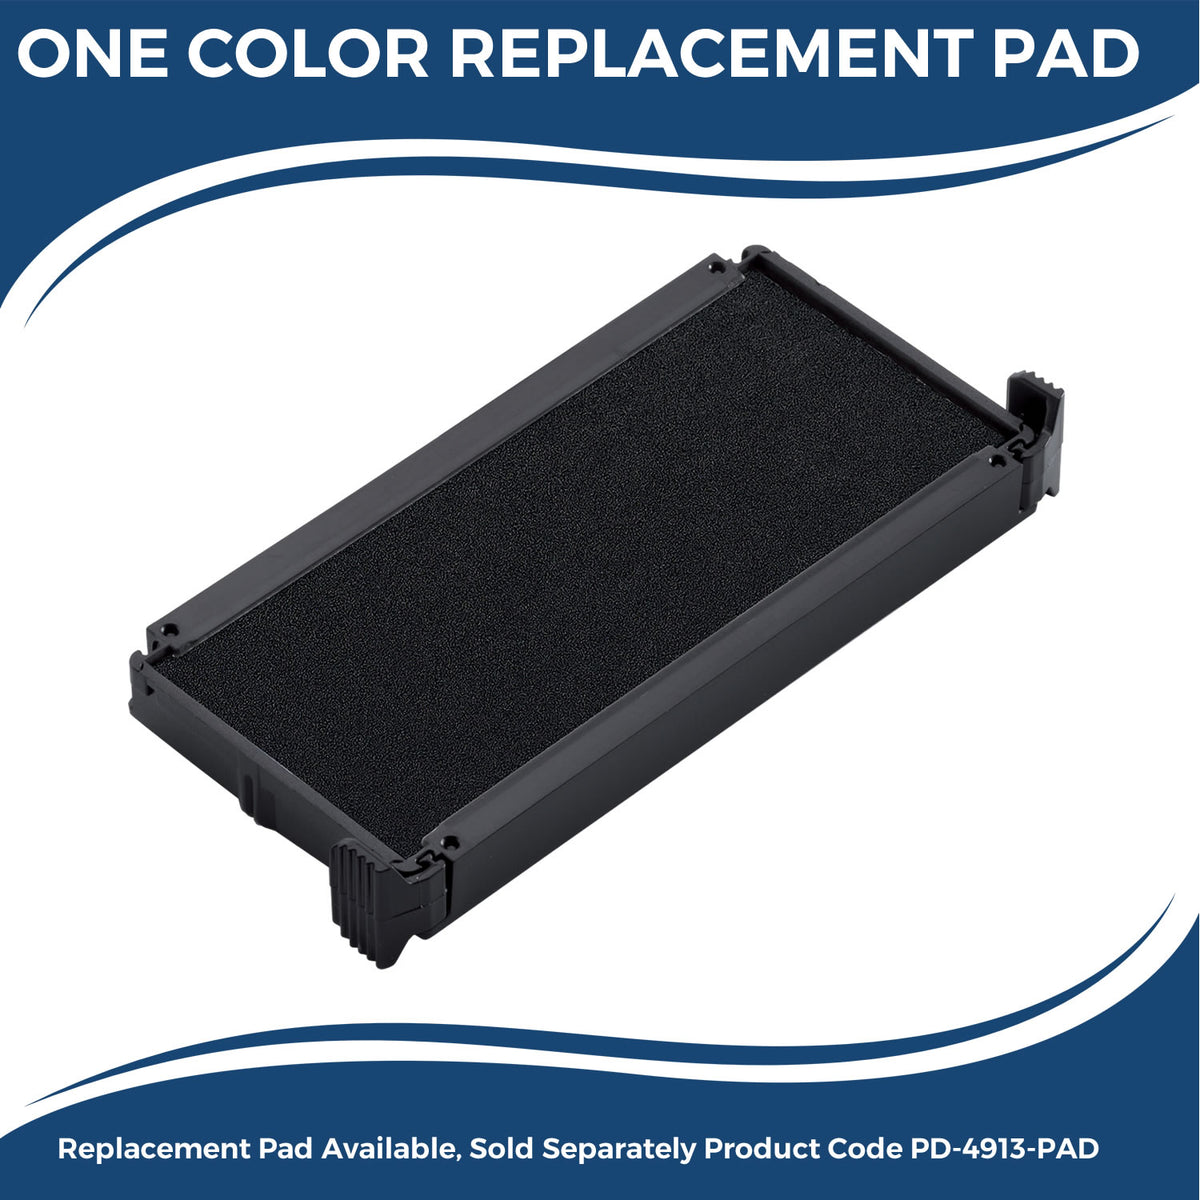 Large Self-Inking Confirmation Stamp 4902S Large Replacment Pad